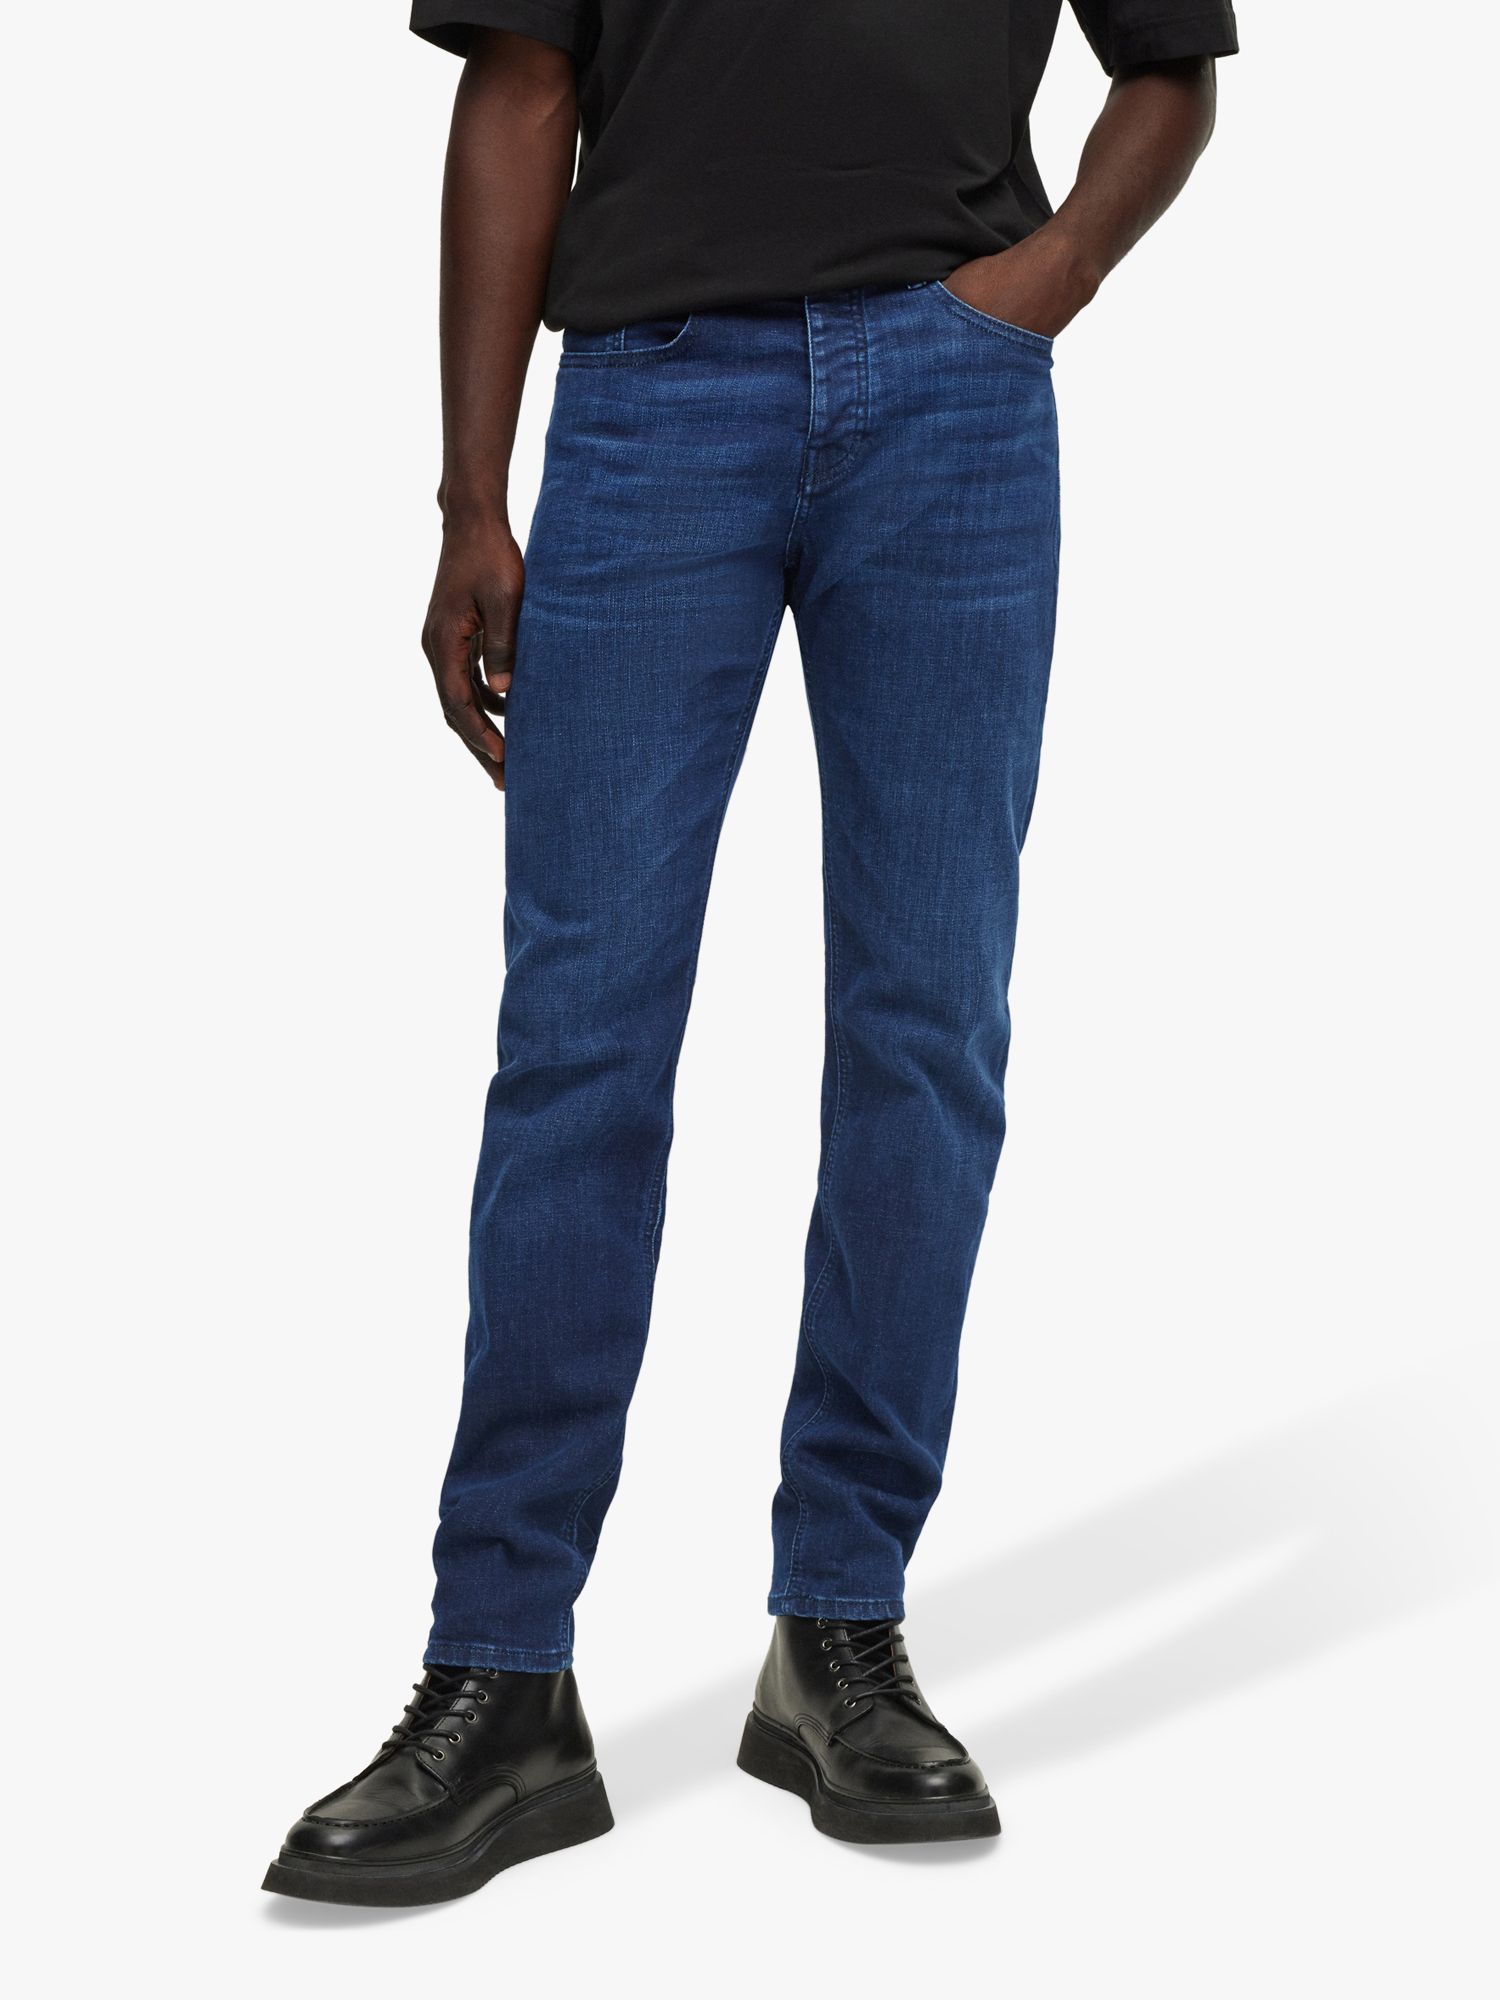 BOSS Taber Tapered Fit Jeans, Navy at John Lewis & Partners